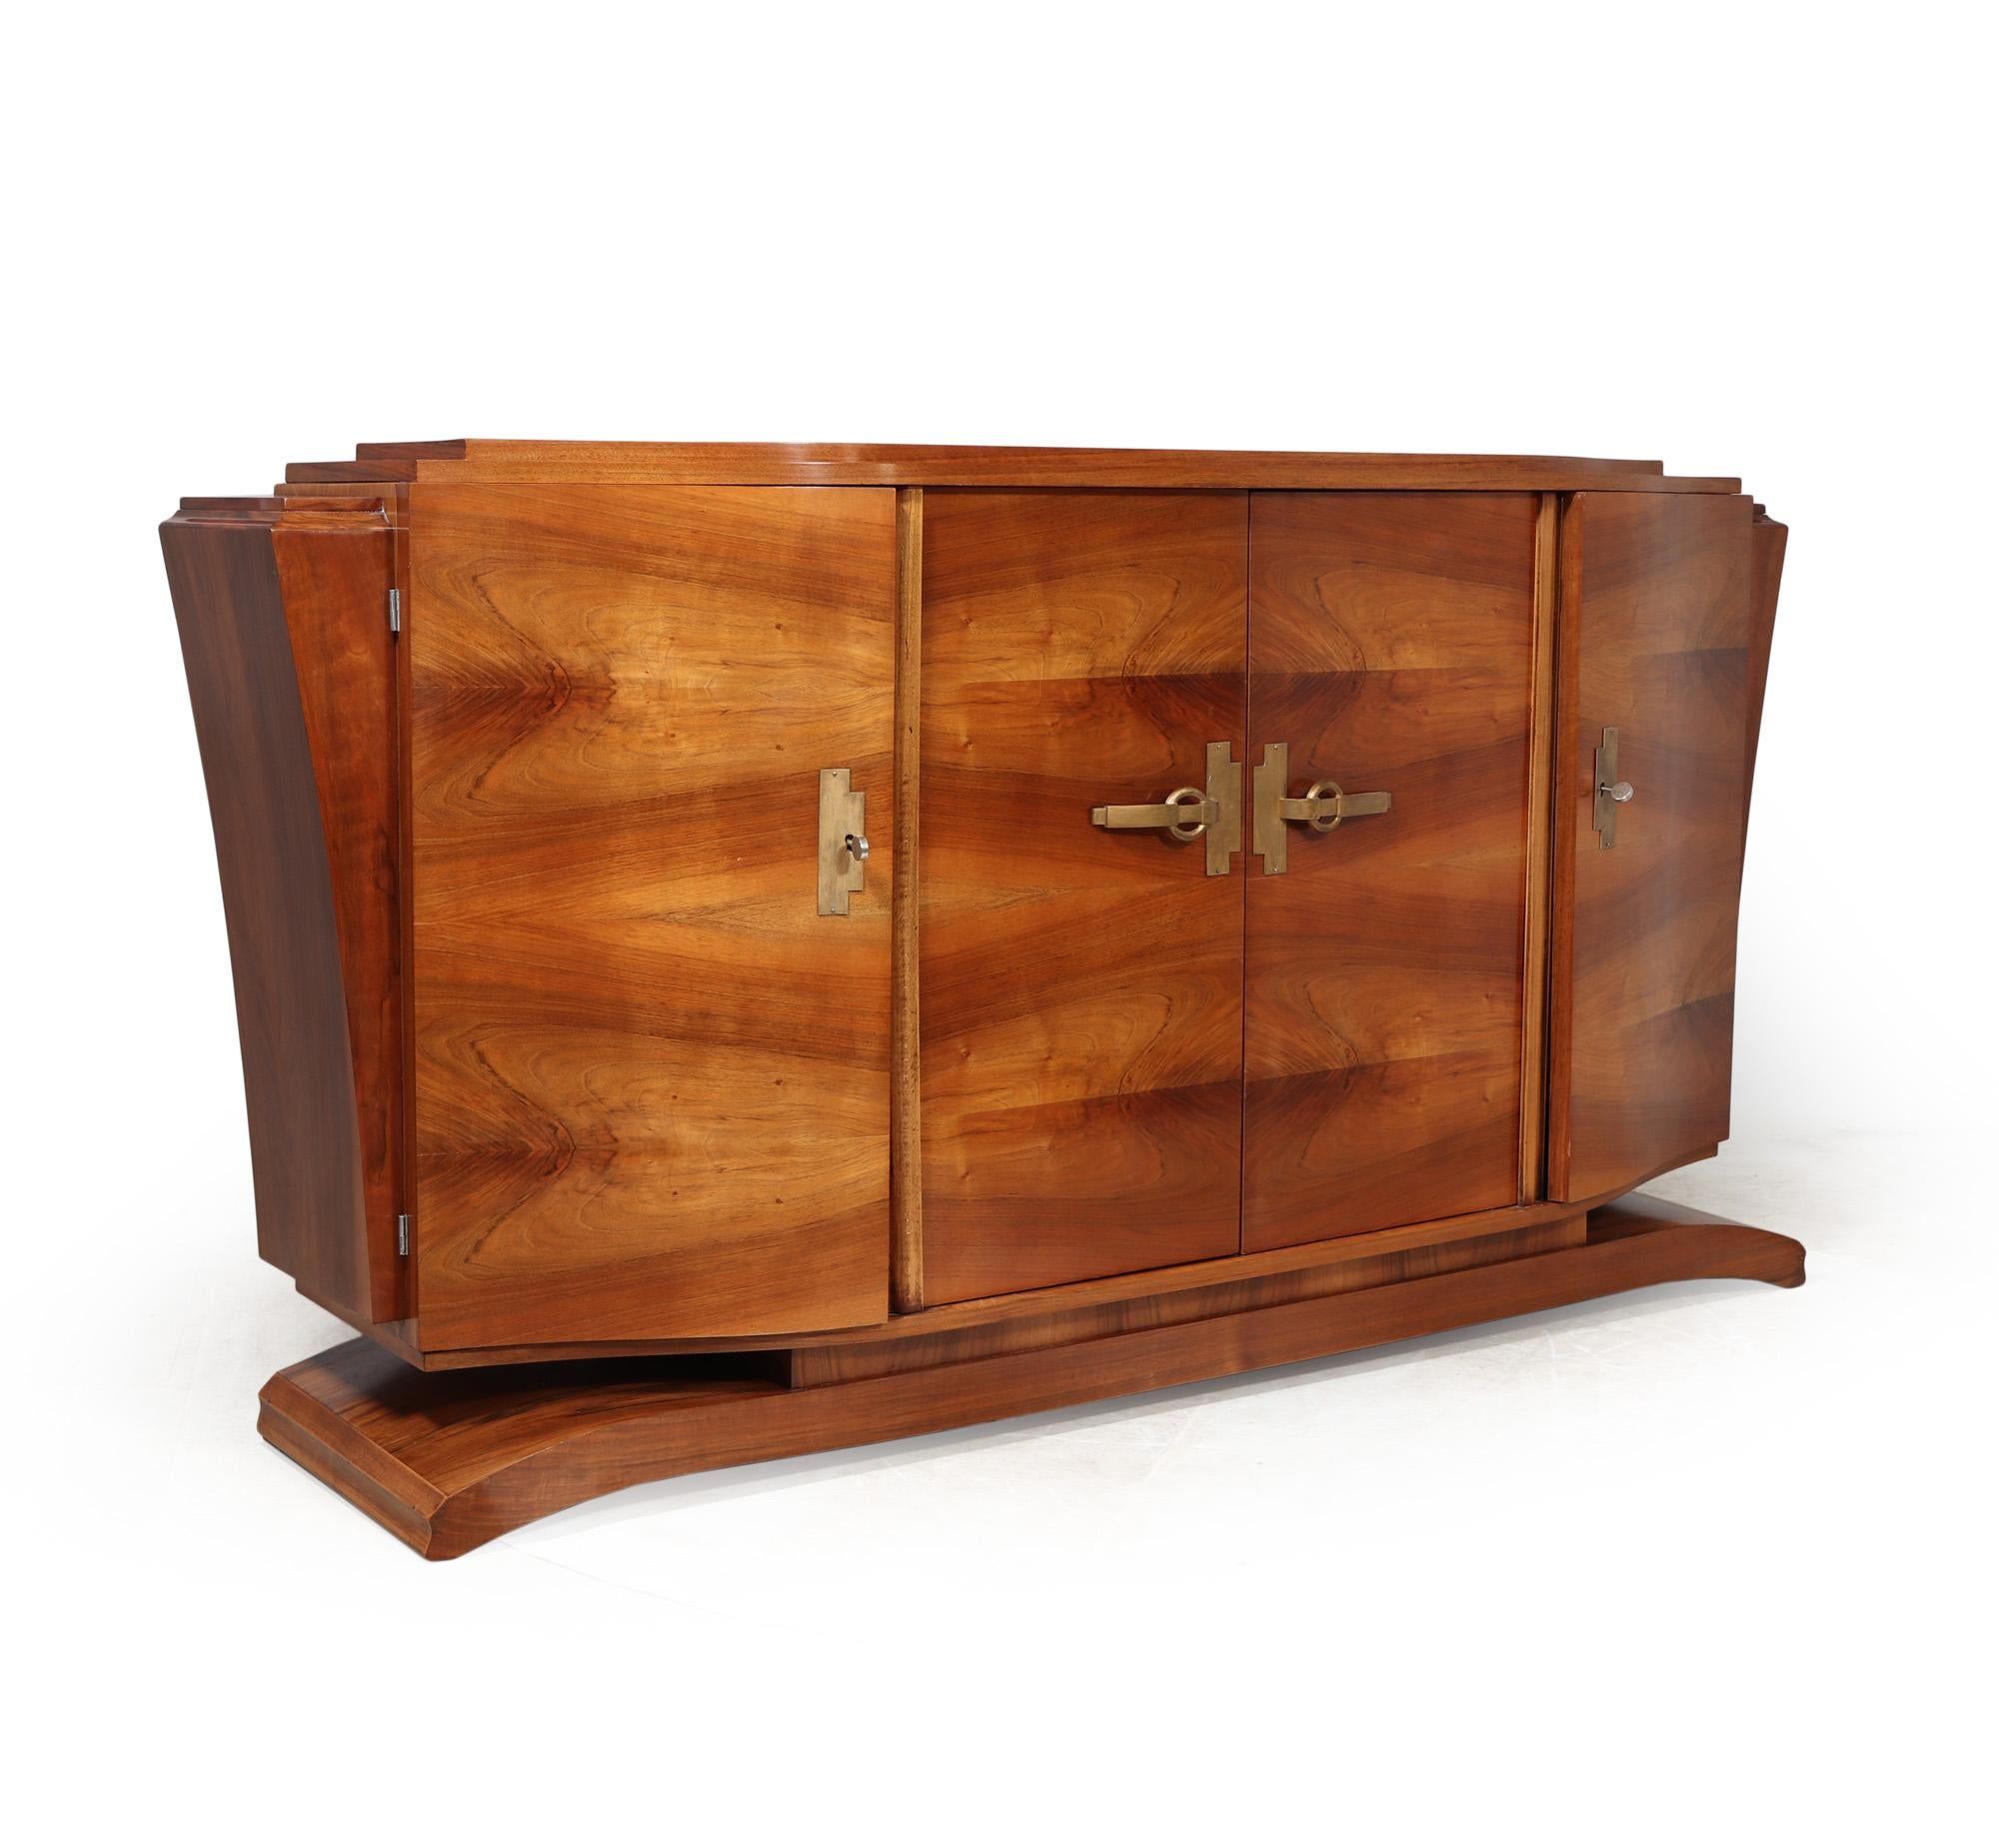 FRENCH ART DECO WALNUT SIDEBOARD
This French art deco walnut sideboard, crafted in the glamorous era of the 1930s, boasts a sophisticated stylish design. The four doors feature adjustable shelves concealed behind opulent gold patinated handles,